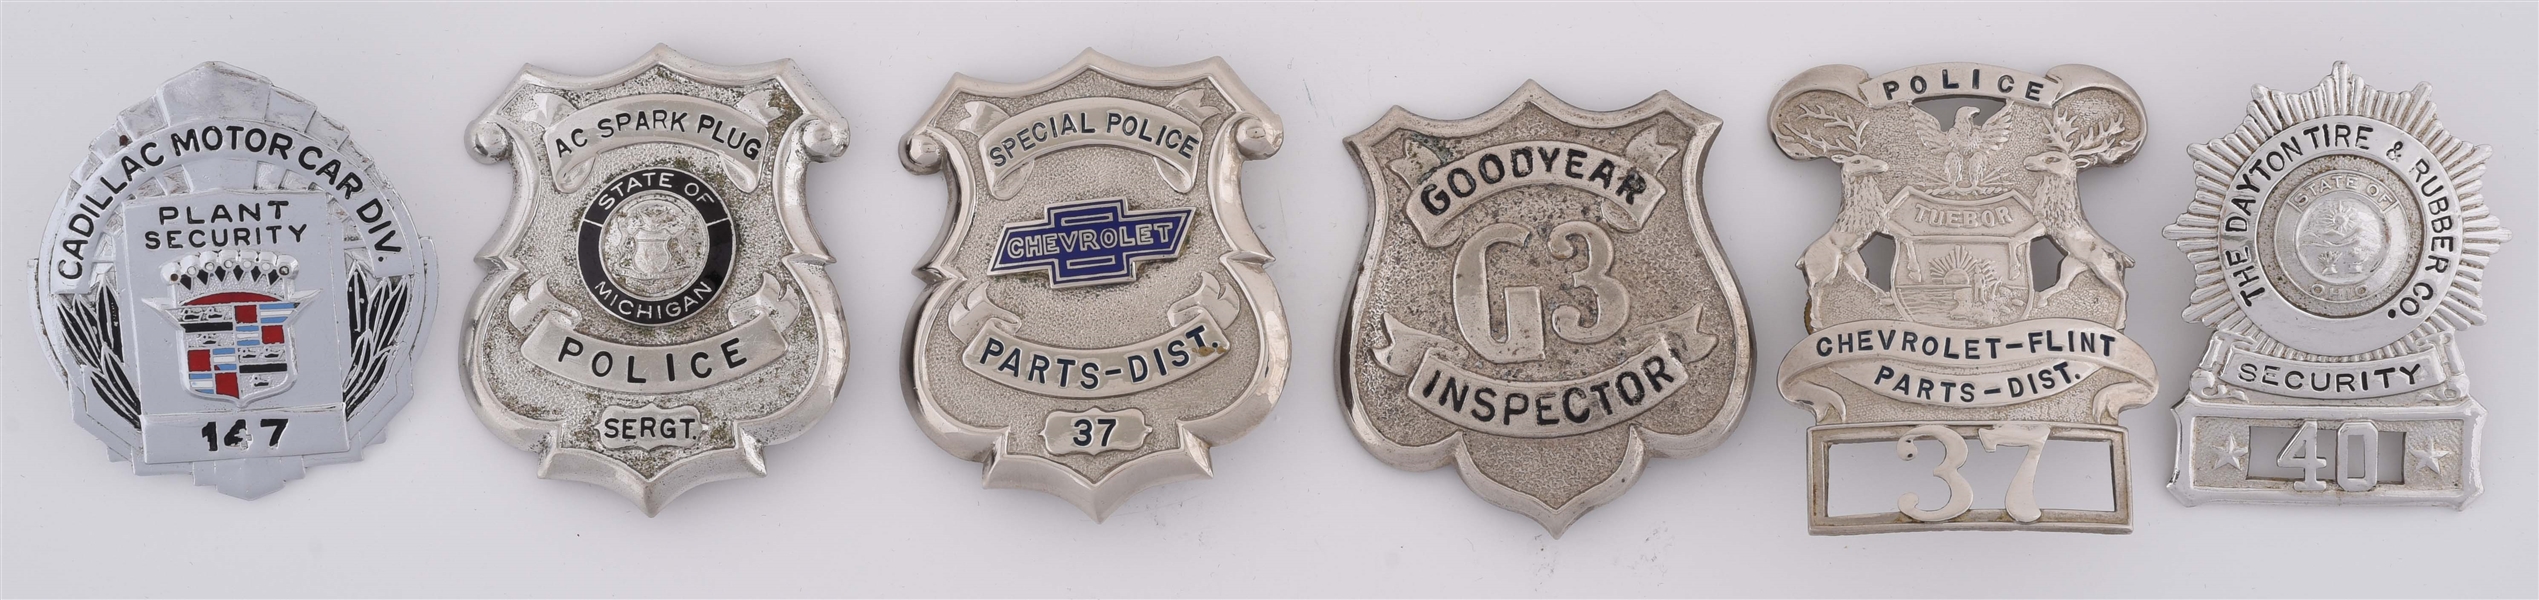 LOT OF 6: METAL ADVERTISING BADGES FROM GOODYEAR, CADILLAC & CHEVROLET. 